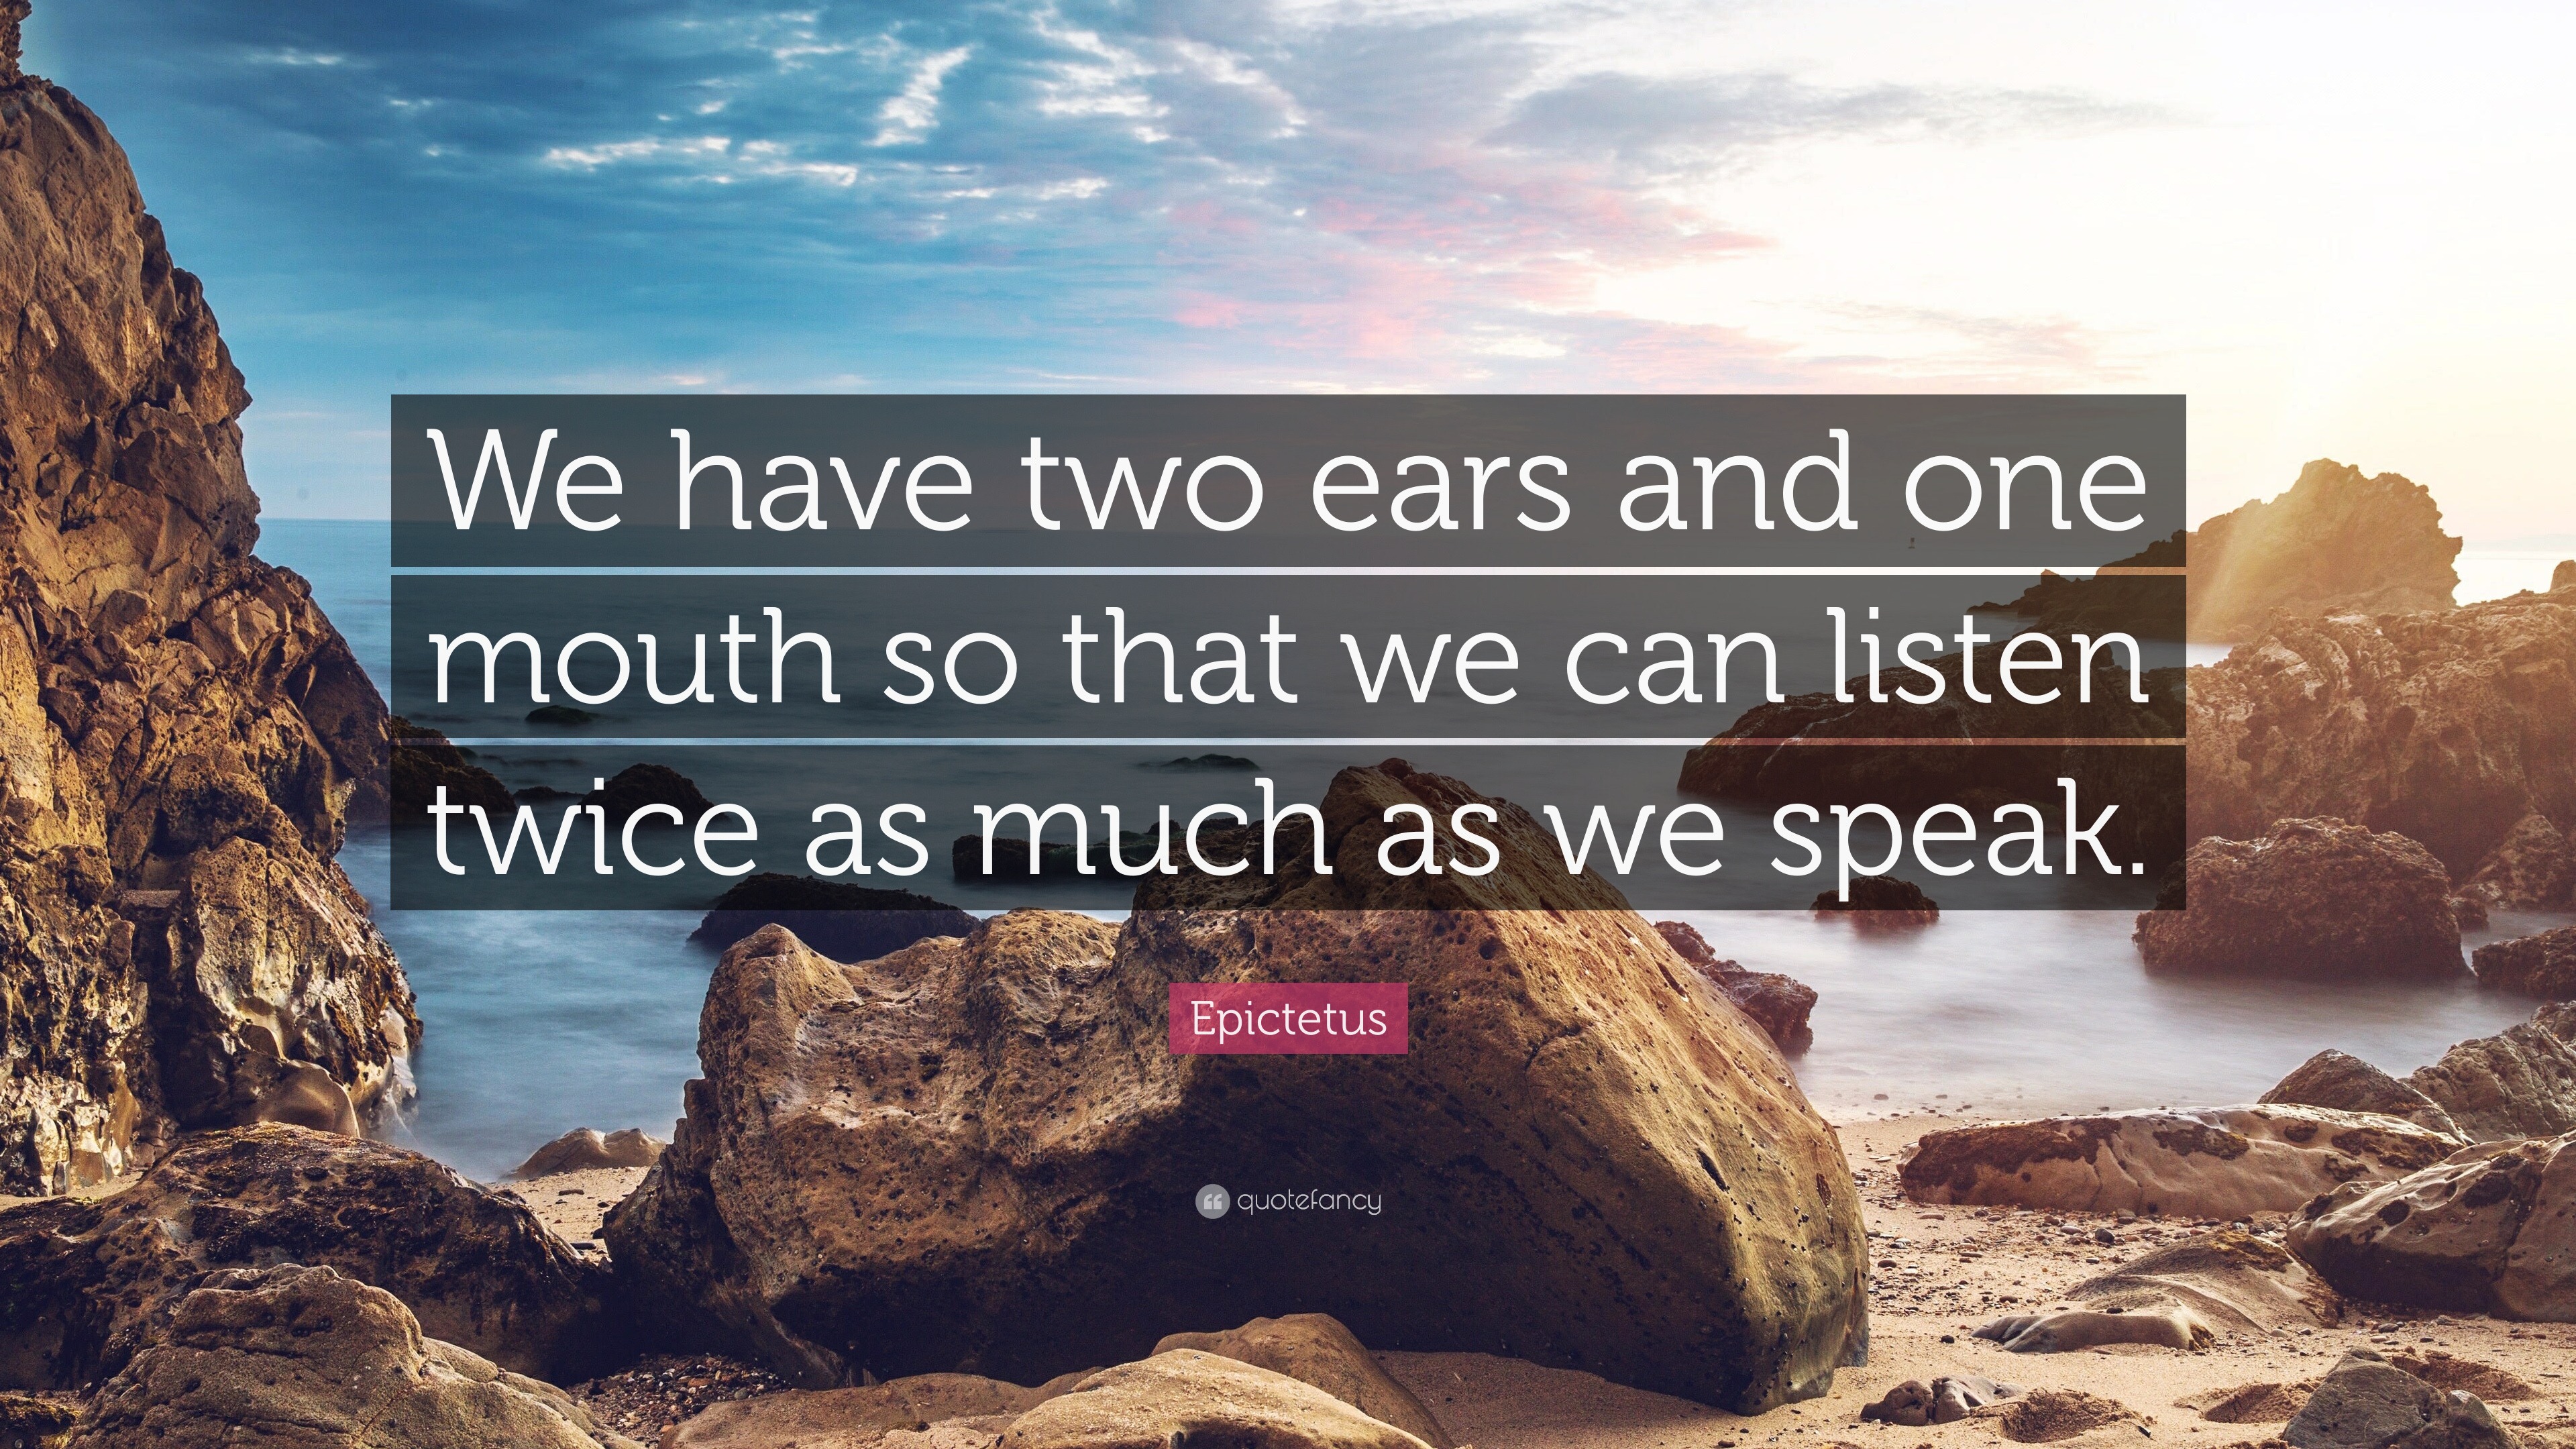 2058095 Epictetus Quote We have two ears and one mouth so that we can